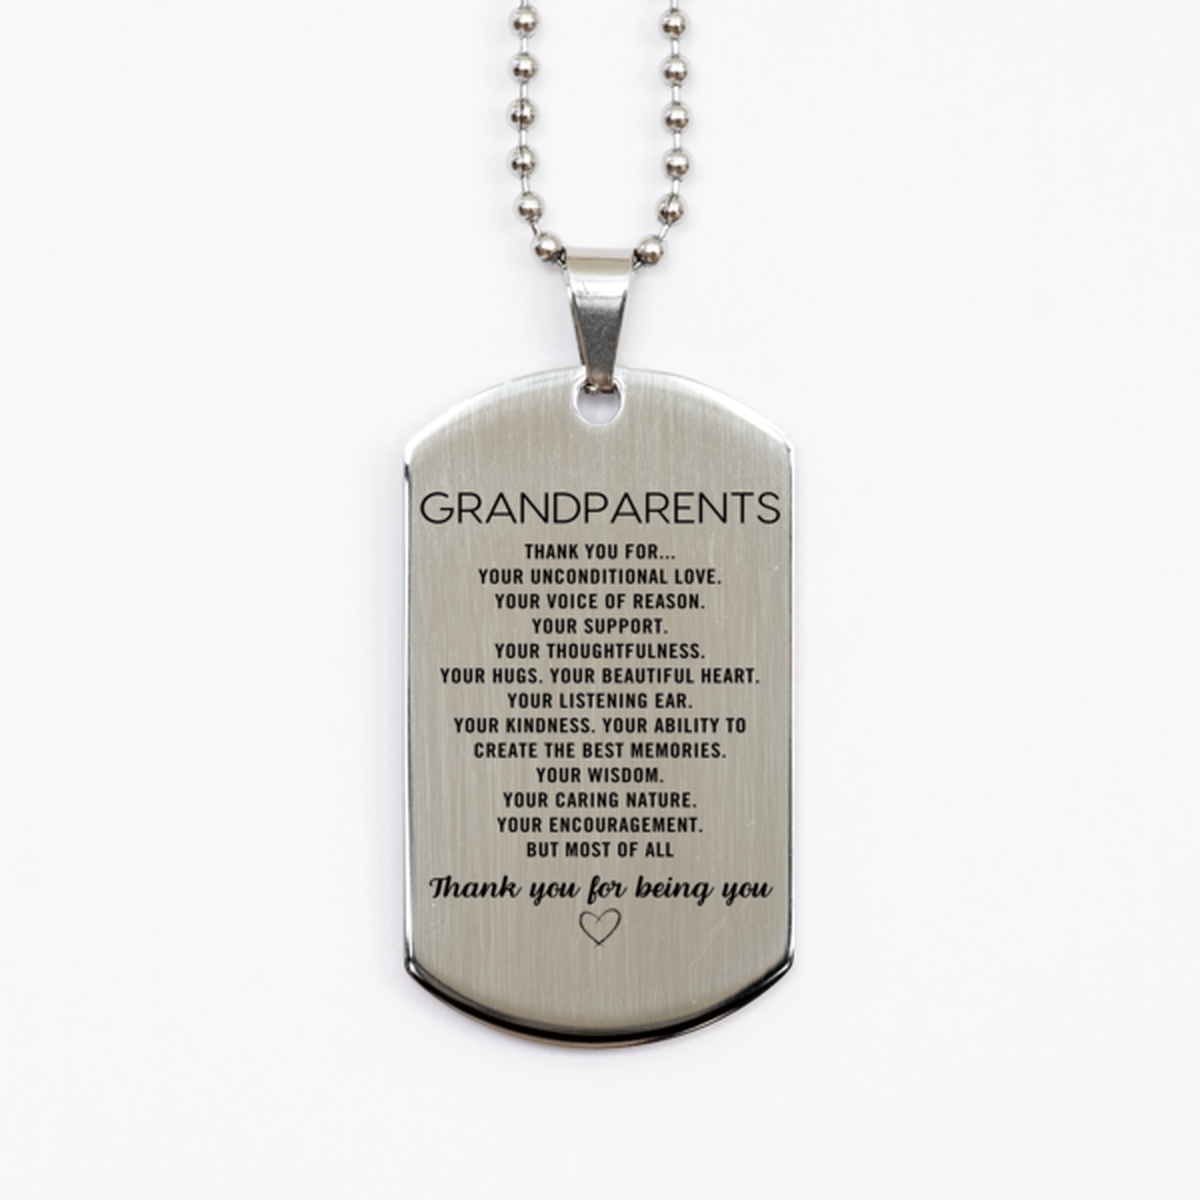 Grandparents Silver Dog Tag Custom, Engraved Gifts For Grandparents Christmas Graduation Birthday Gifts for Men Women Grandparents Thank you for Your unconditional love